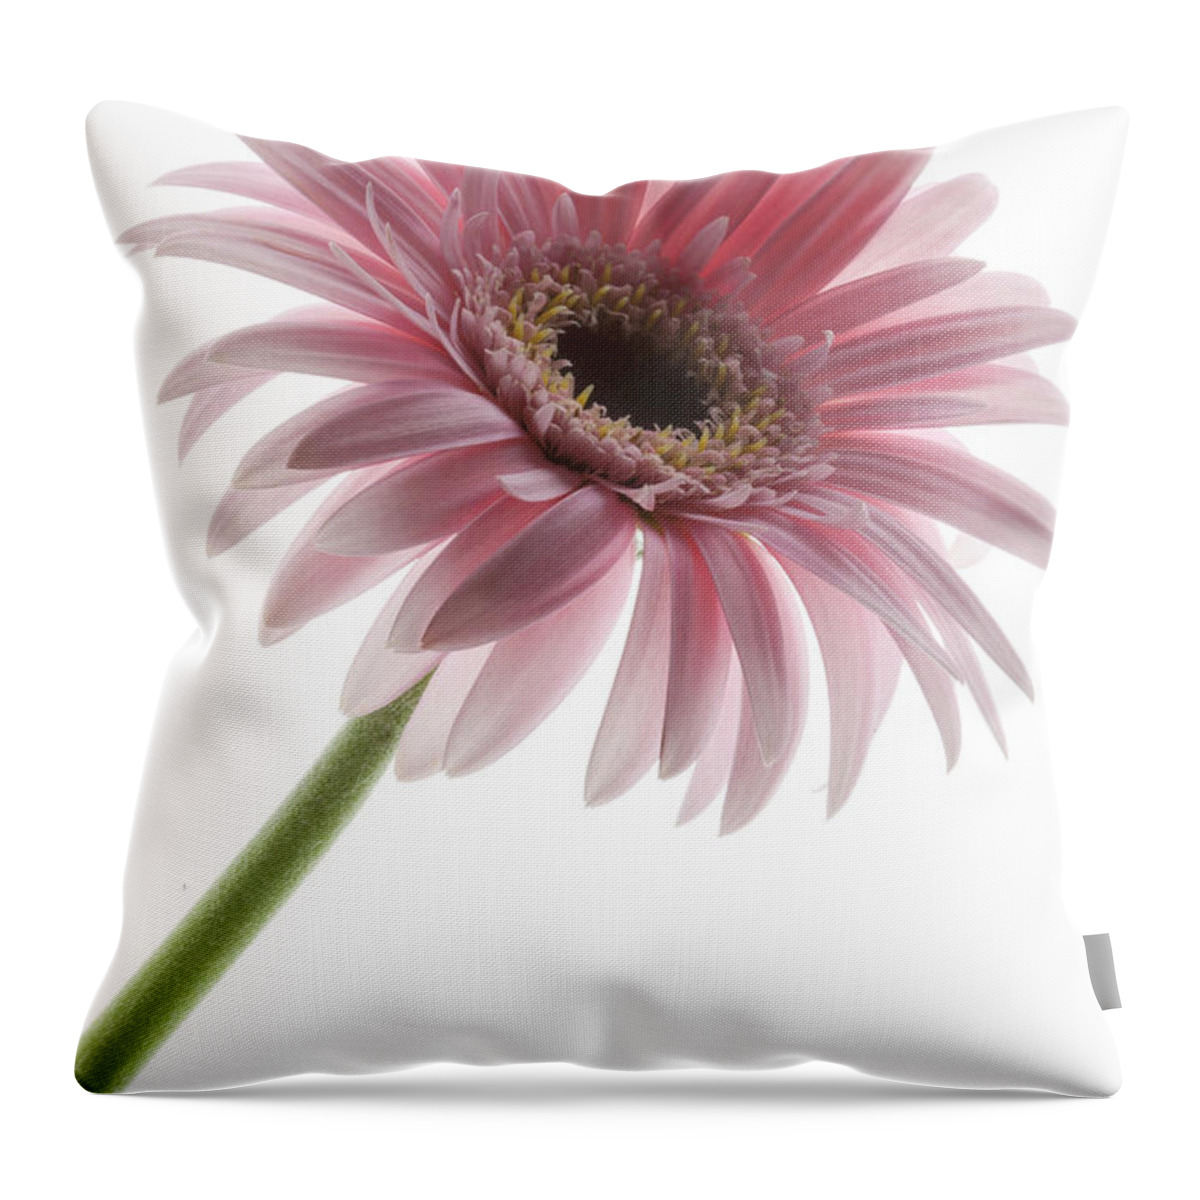 Pink Posey Throw Pillow featuring the photograph Pink Posey by Patty Colabuono